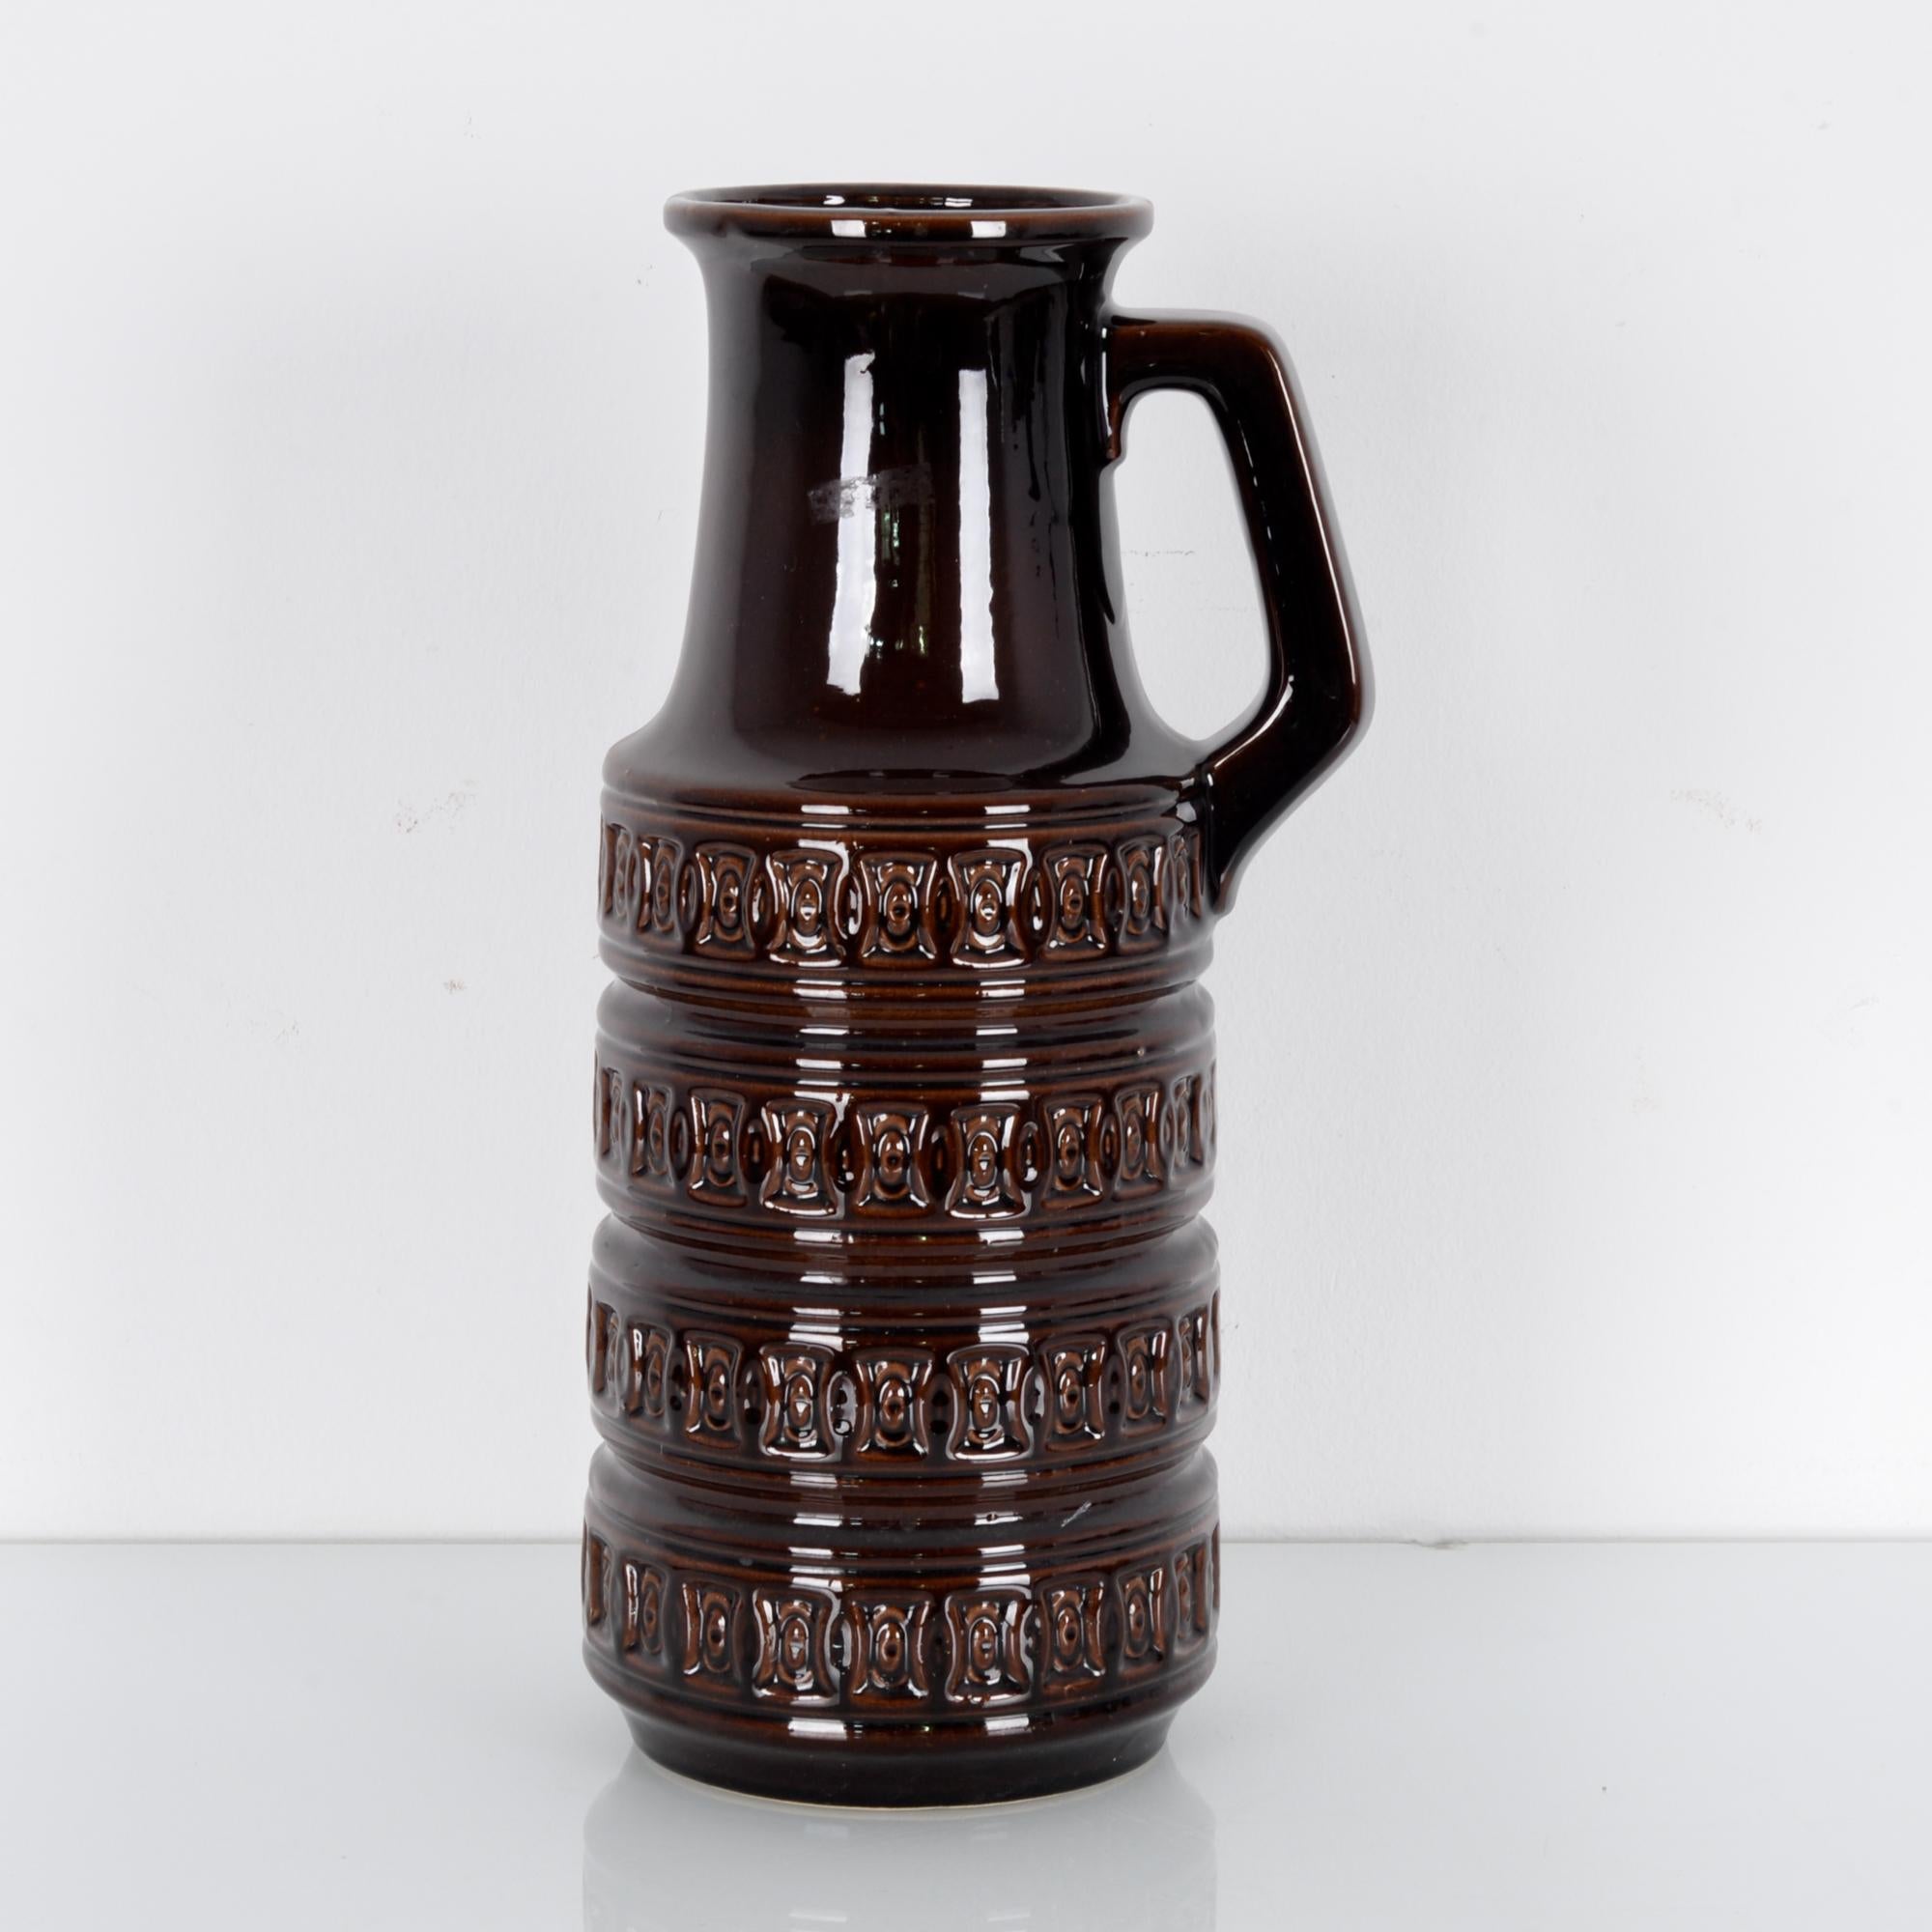 A ceramic vase produced in West Germany, circa 1950. This handled vase coated in brown glaze stands at 45 cm tall. Art pottery was a flowering movement in midcentury West Germany, here characterized by the engraved pattern, thick layer of glaze, and